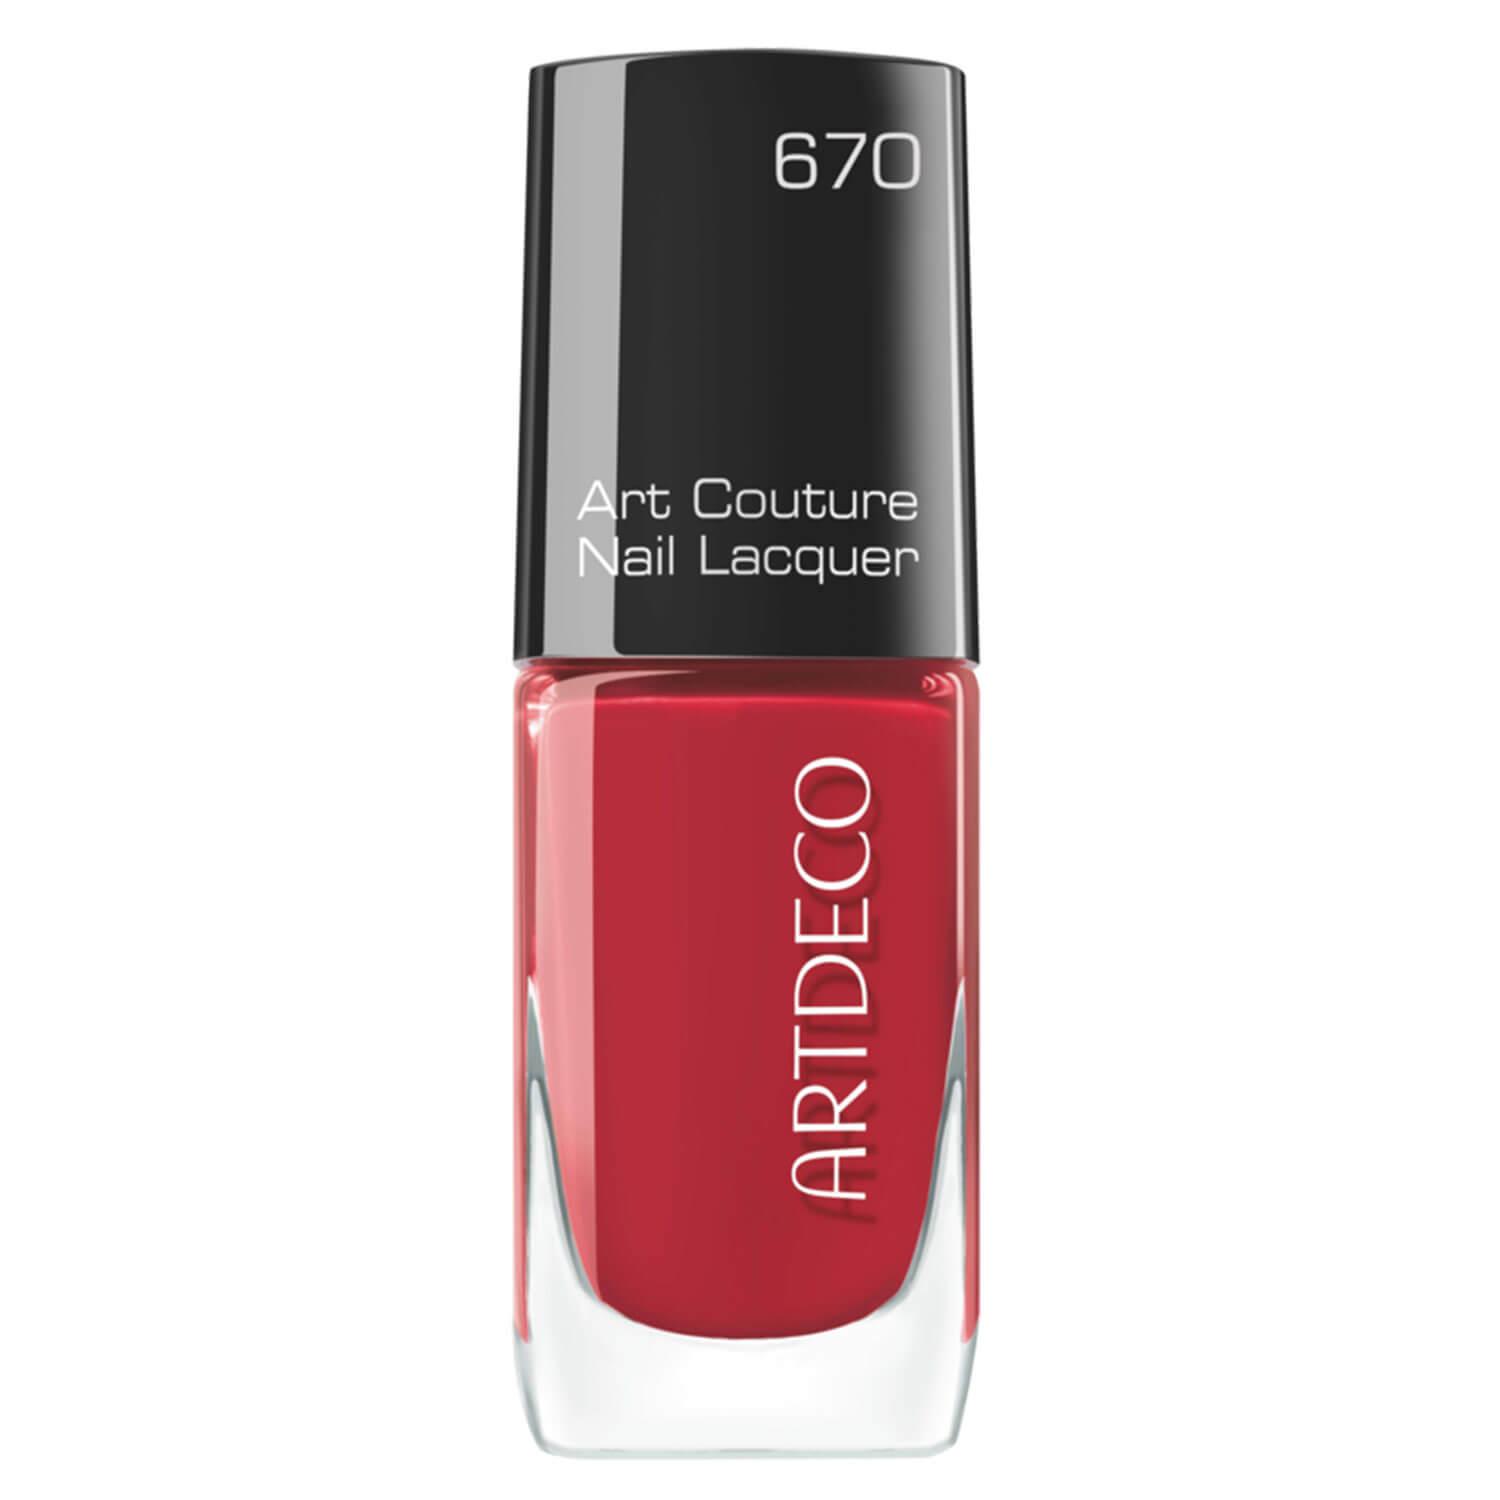 Art Couture - Nail Lacquer 670 Lady in Red